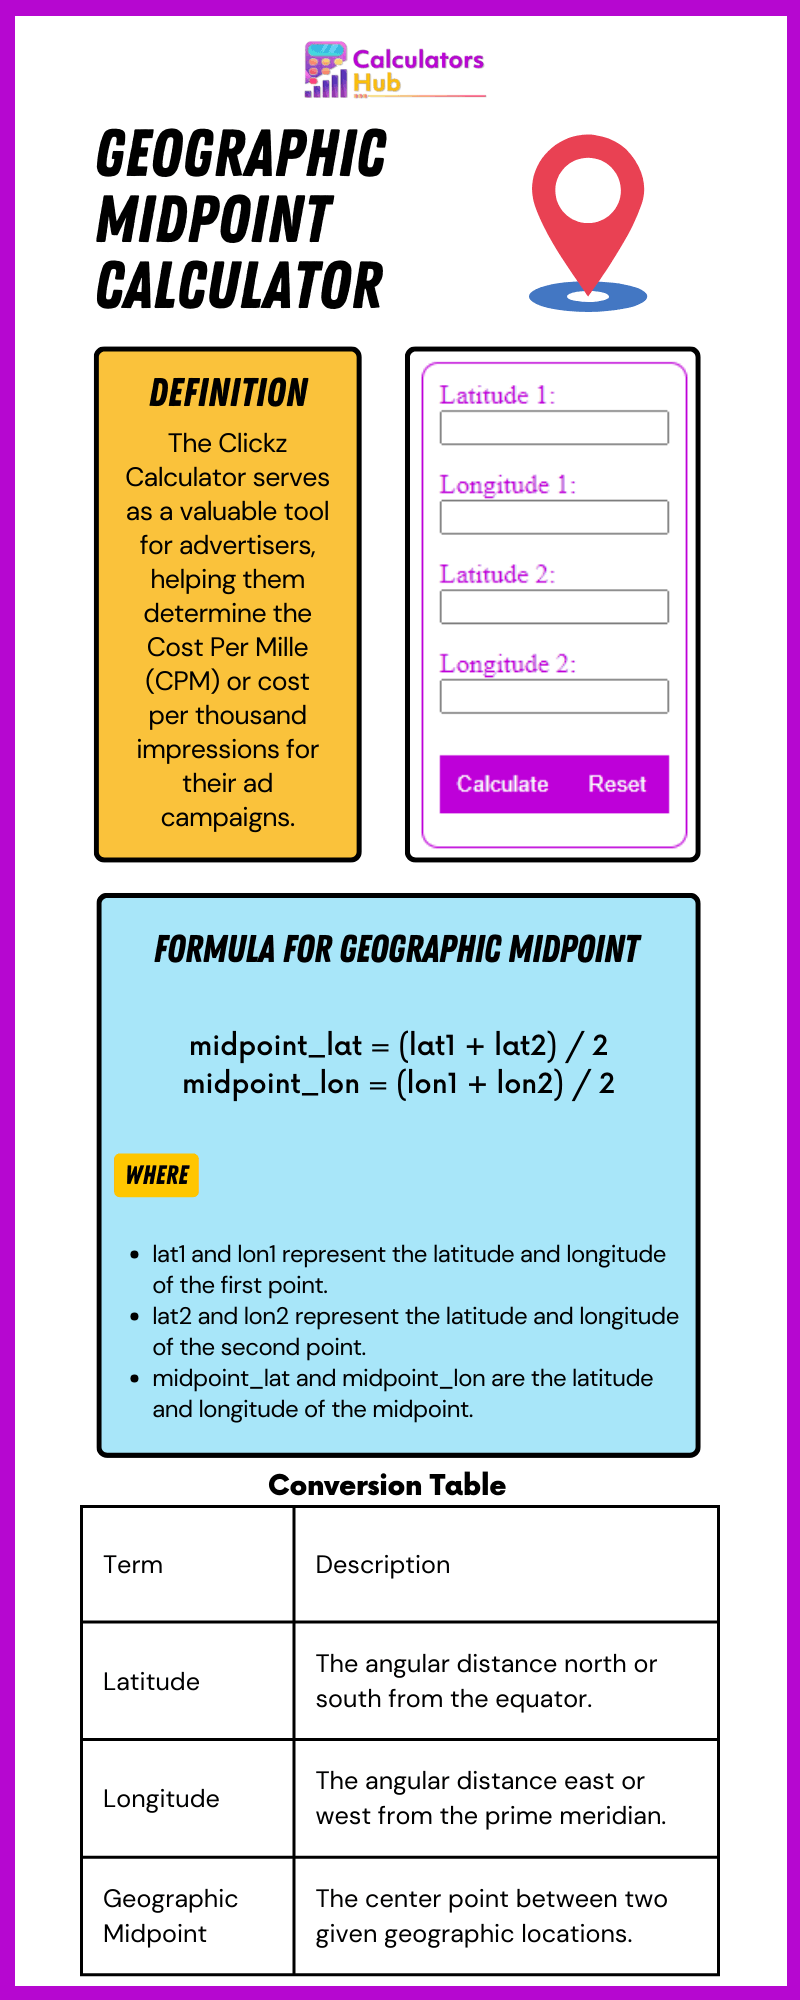 Geographic Midpoint Calculator